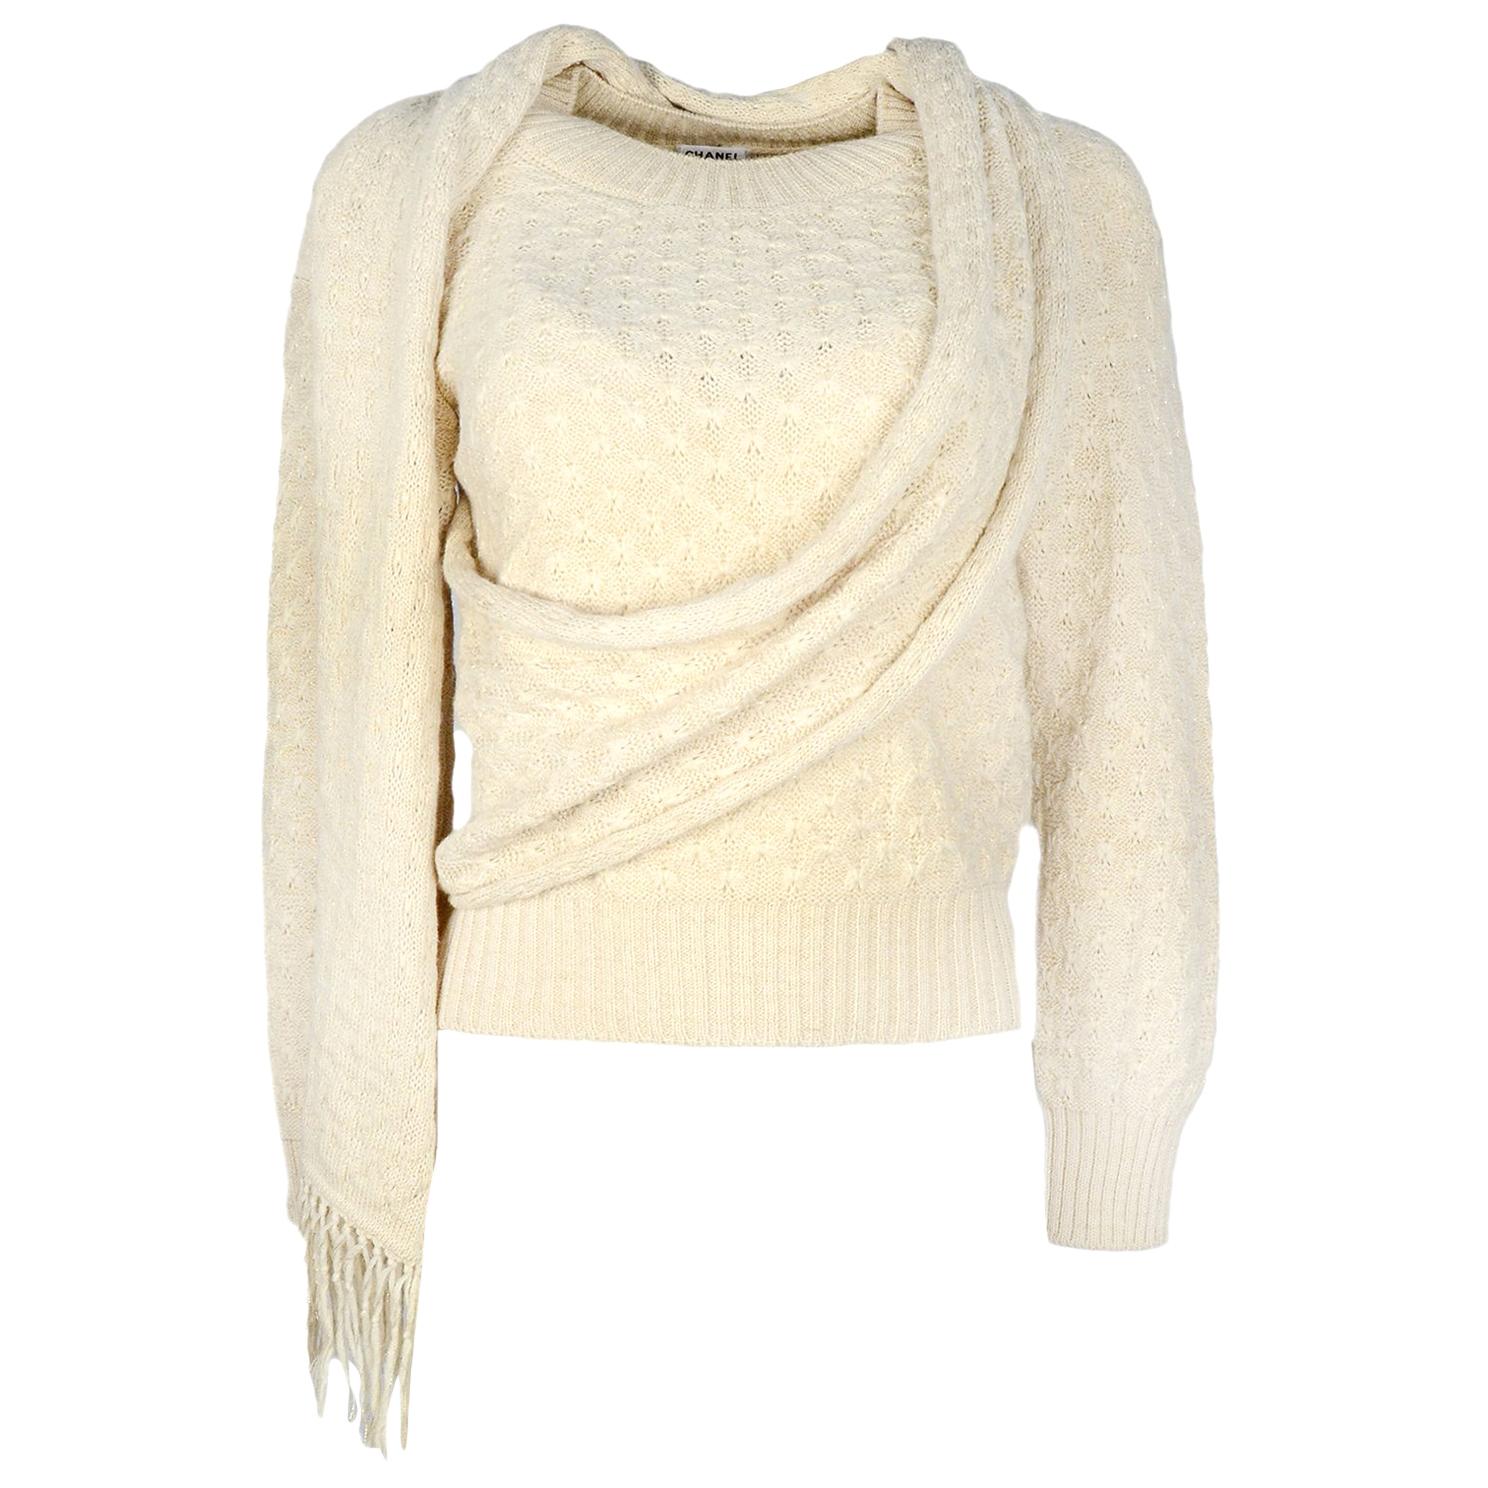 Chanel Cream Knit Sweater W/ Attached Scarf Sz 38